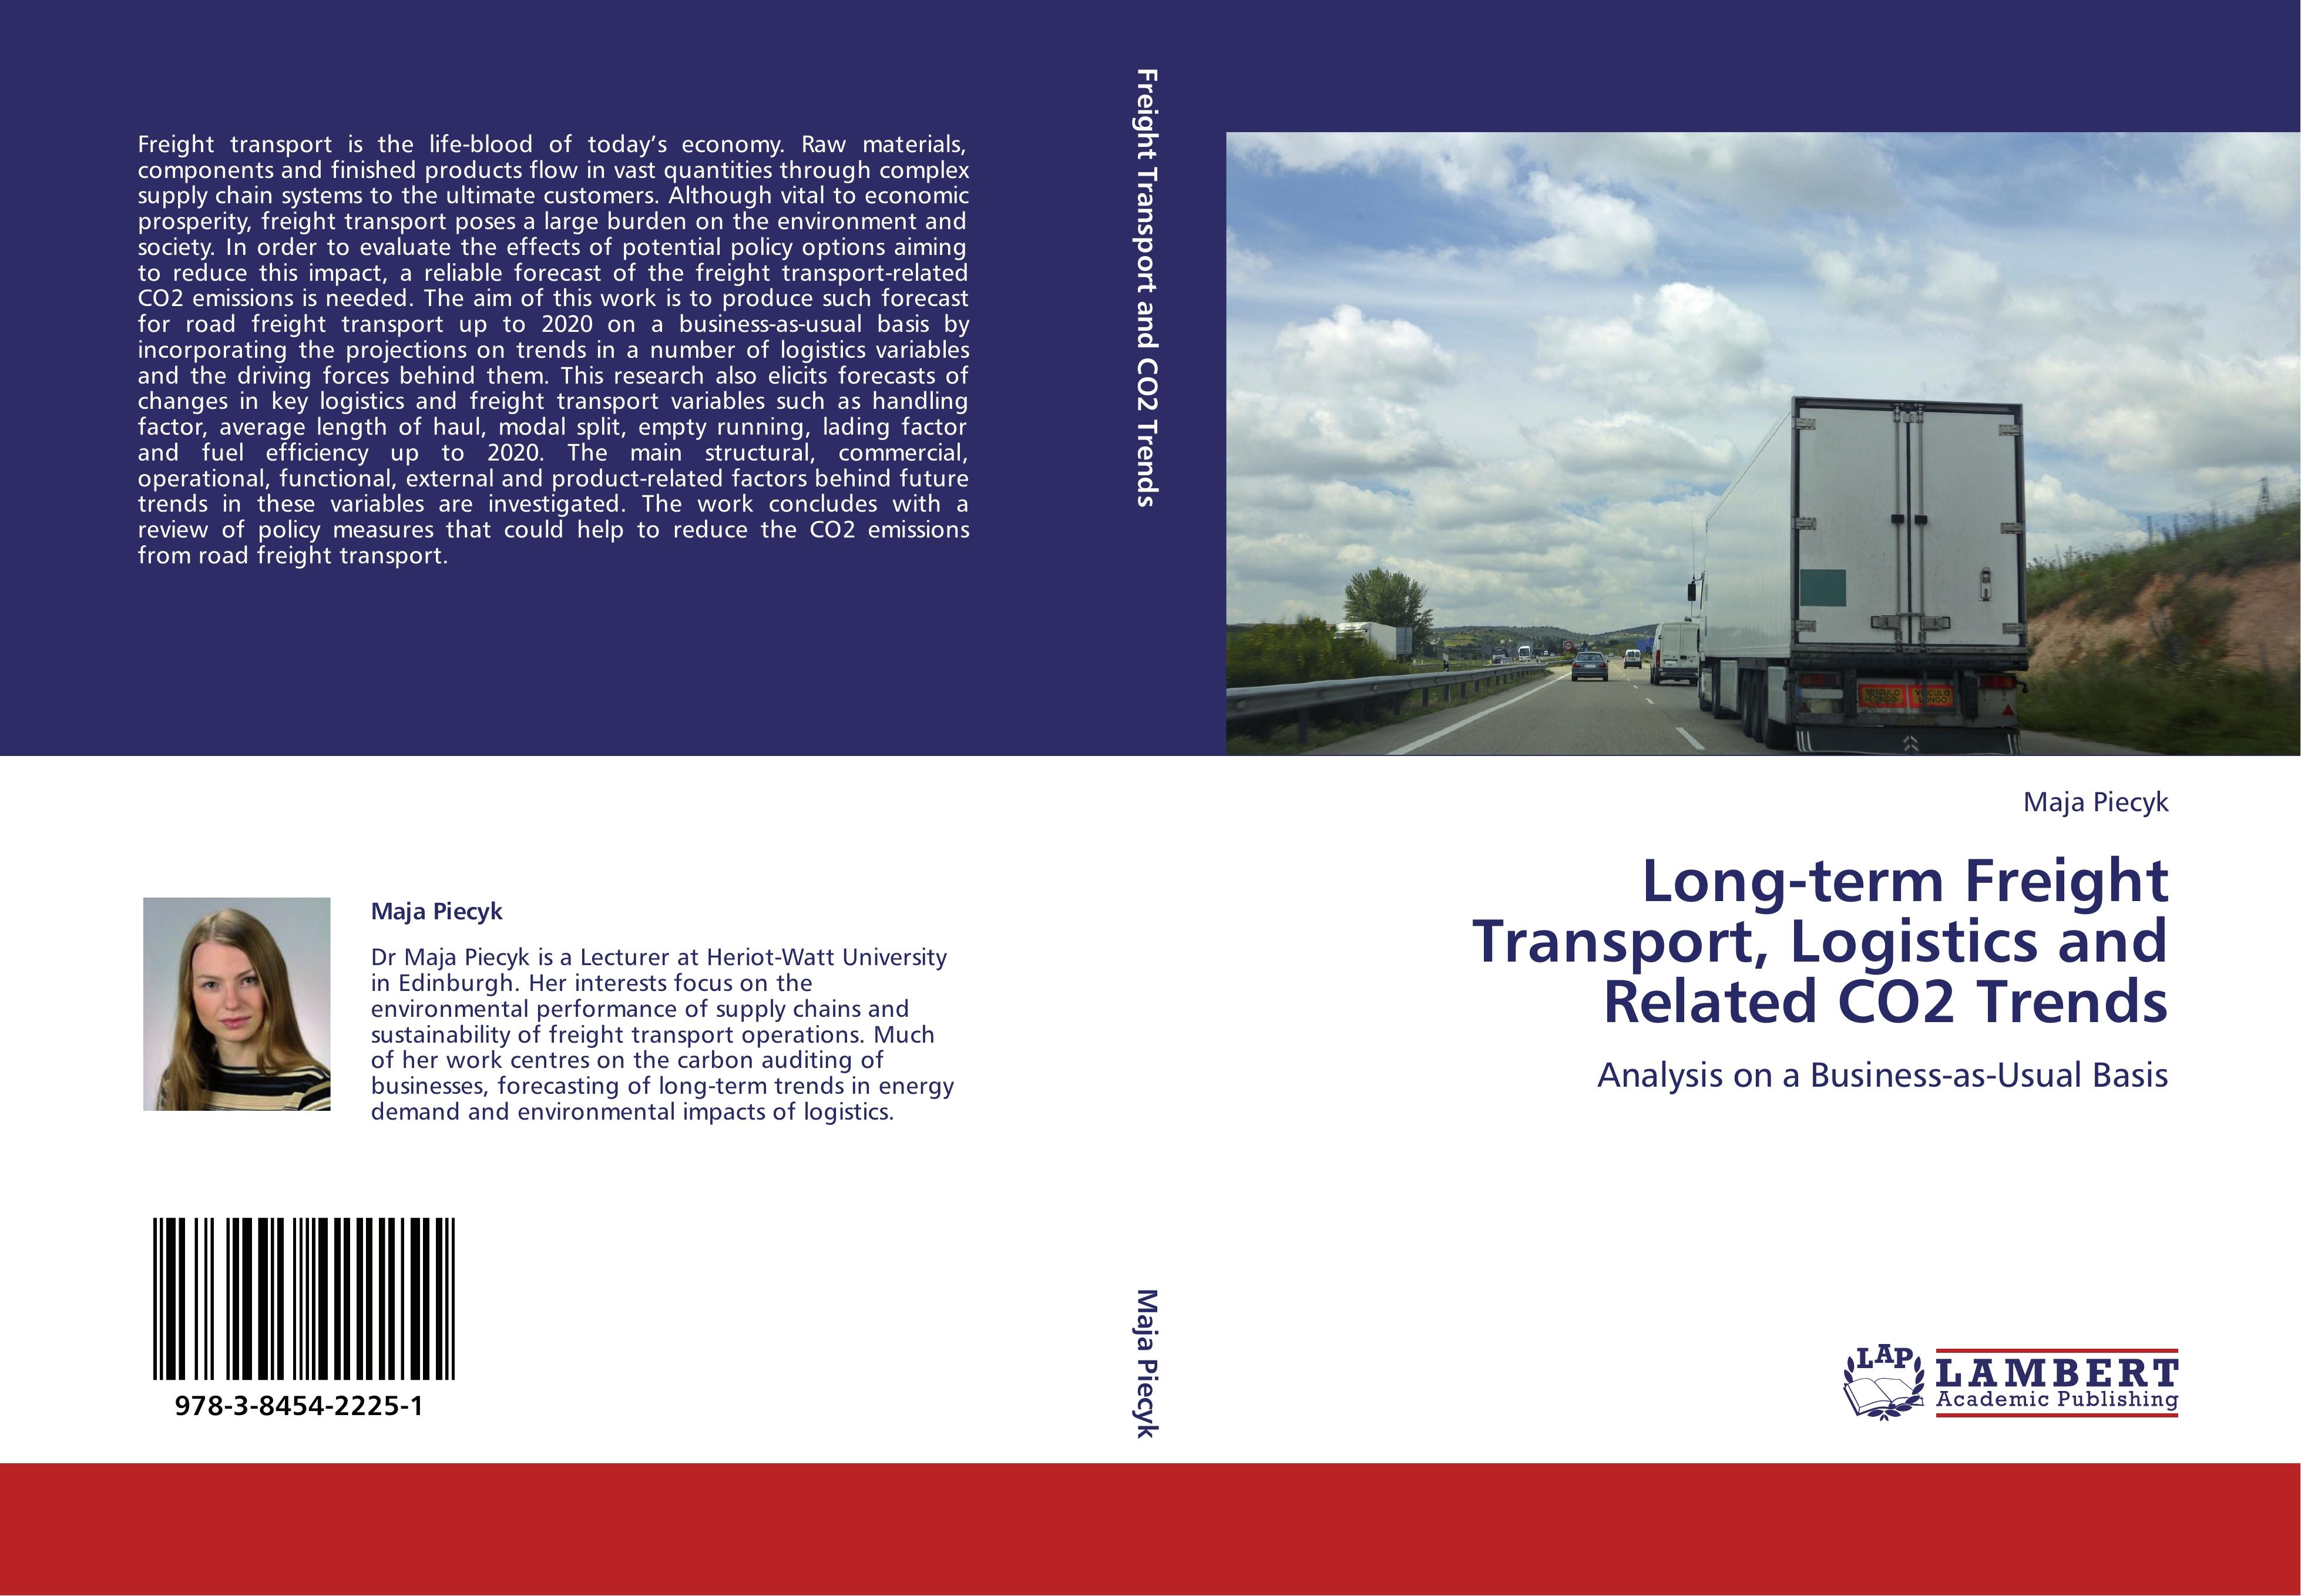 Long-term Freight Transport, Logistics and Related CO2 Trends - Maja Piecyk